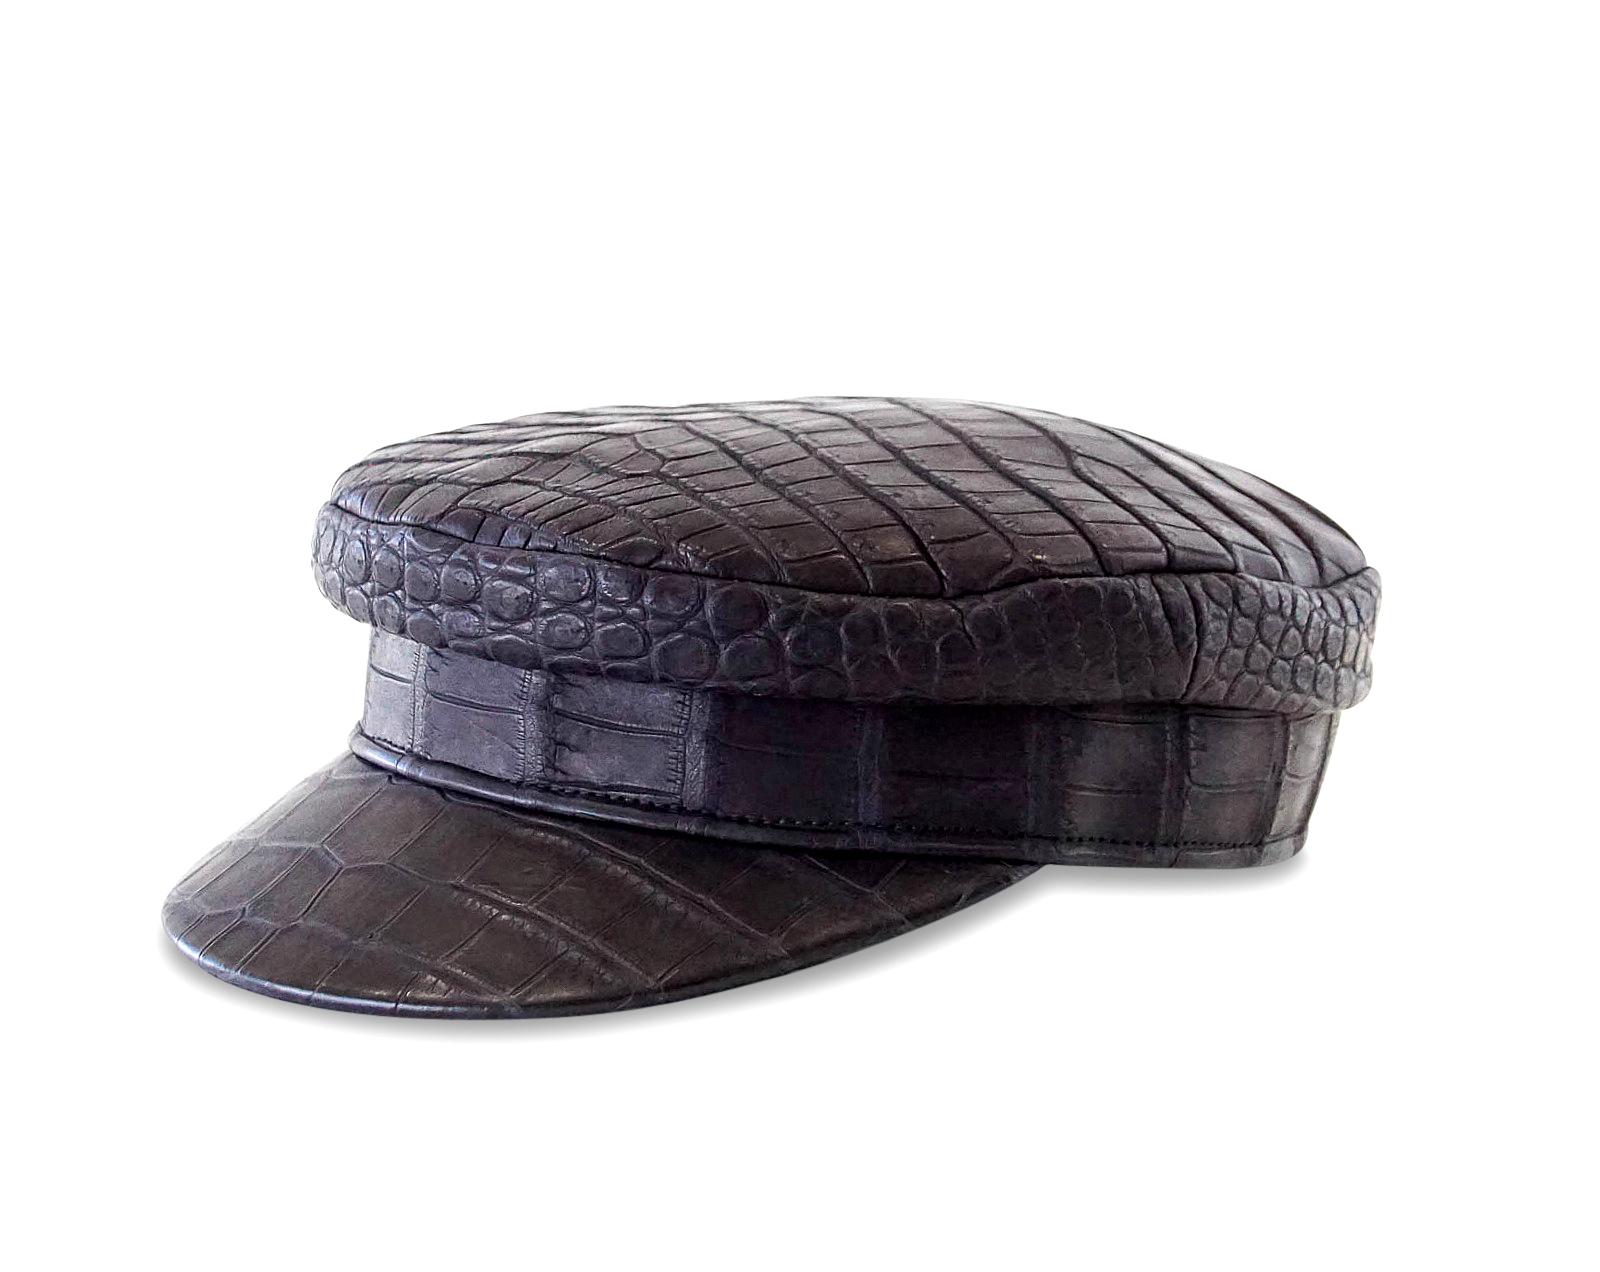 Guaranteed authentic vintage Hermes limited edition fabulous and very rare Black matte crocodile newsboy hat / cap.
This beautiful Hermes cap has black stitching and embossed black lining. 
Comes with signature Hermes orange box hat.
Absolutely